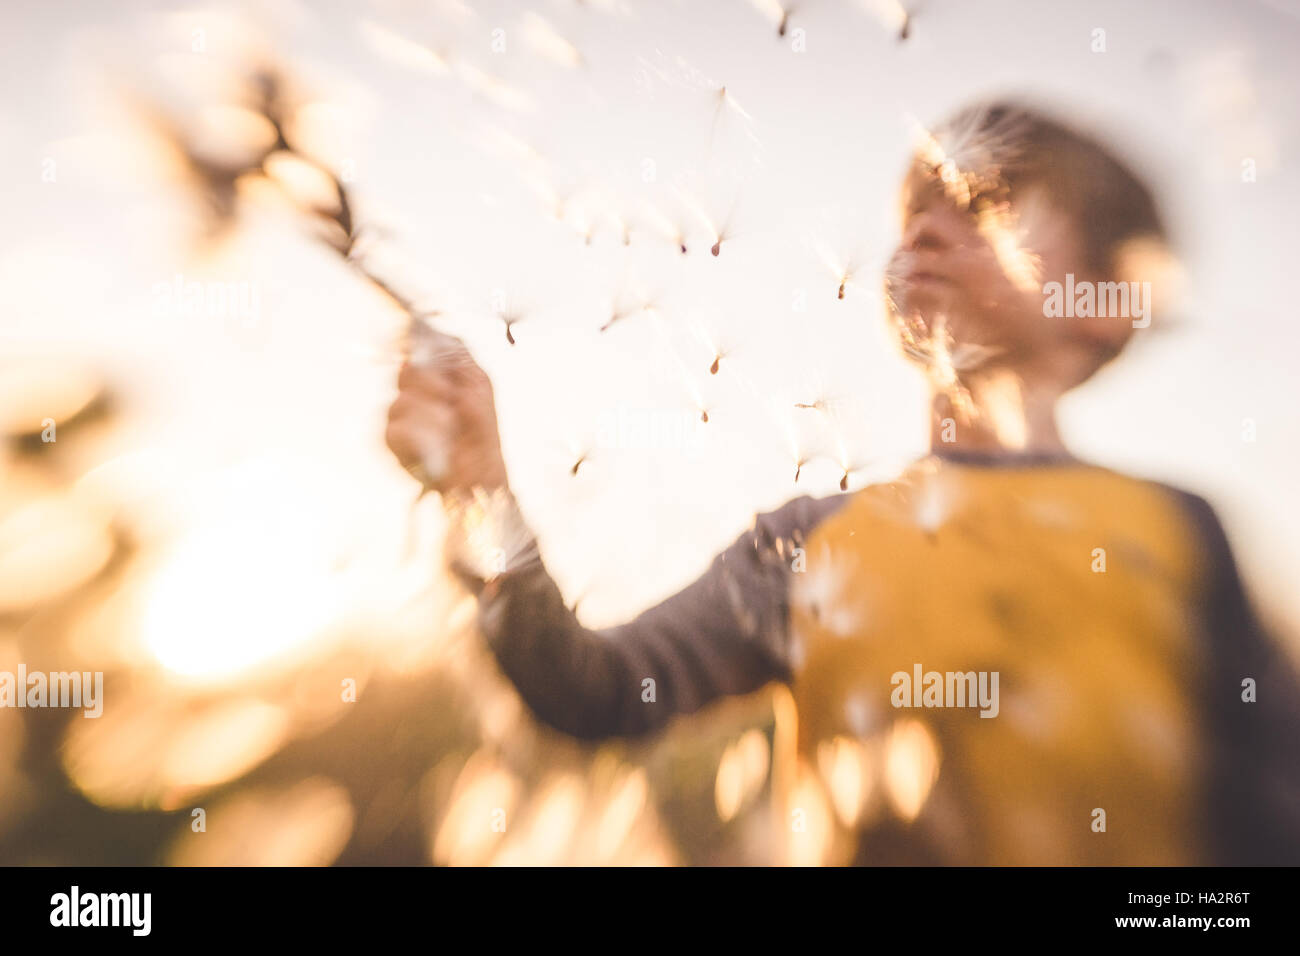 Blurred image of boy releasing seeds in the wind Stock Photo